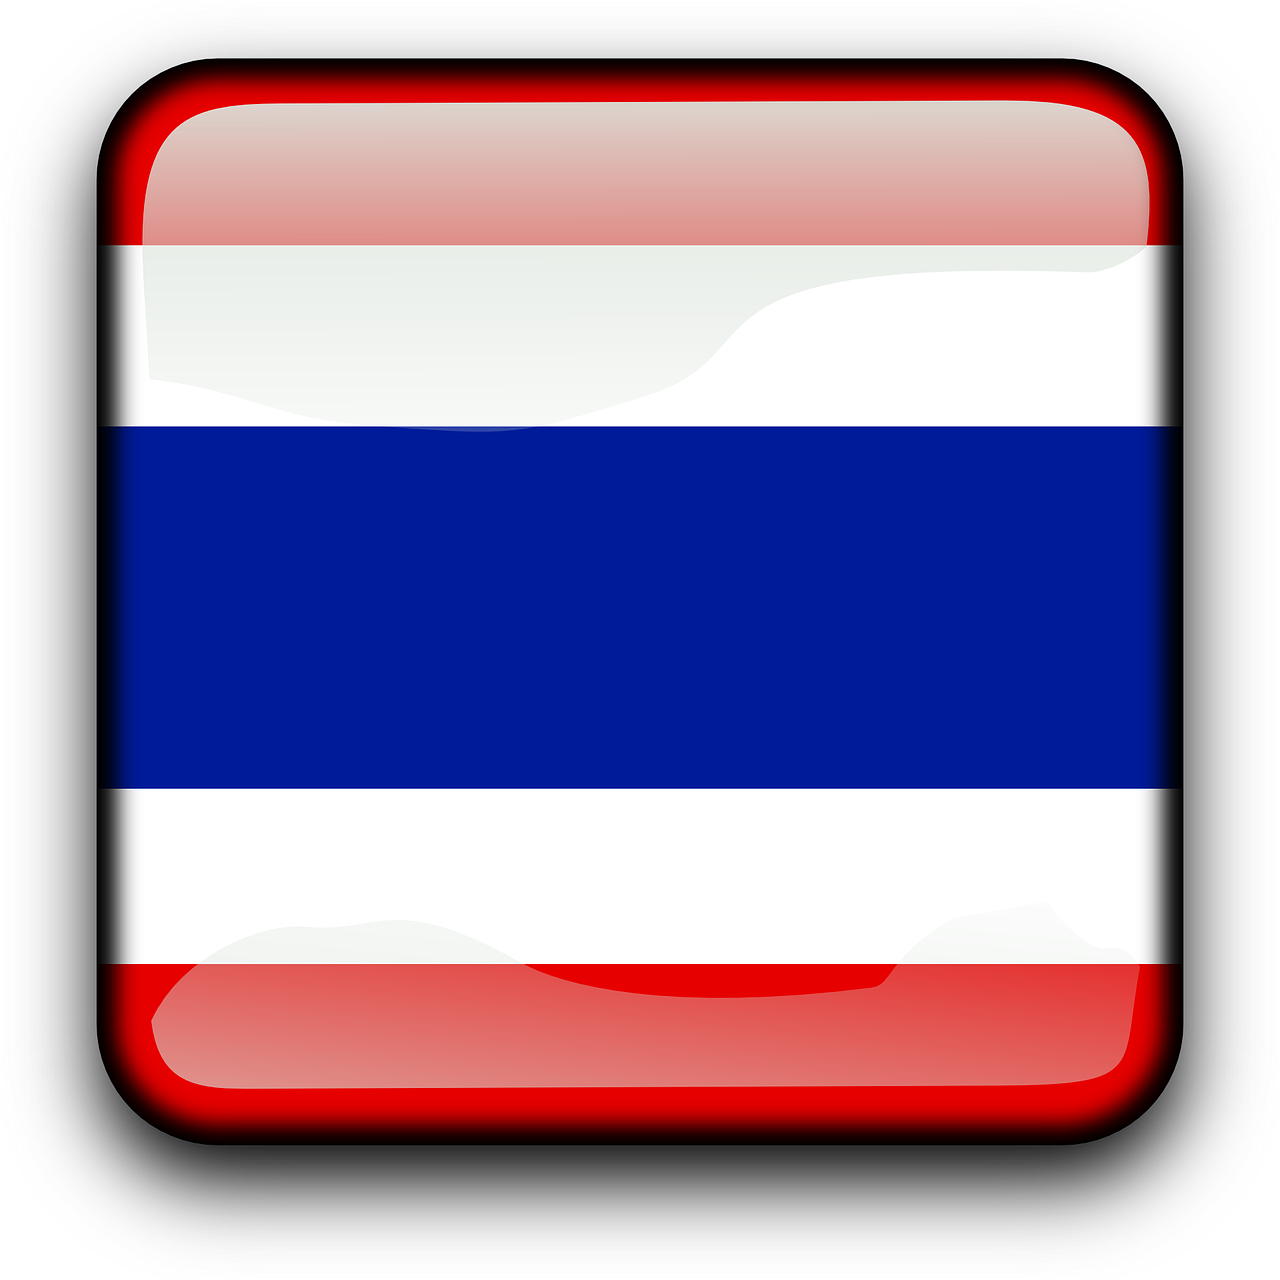 thailand-s-intellectual-property-ip-licensing-laws-aaa-ipright